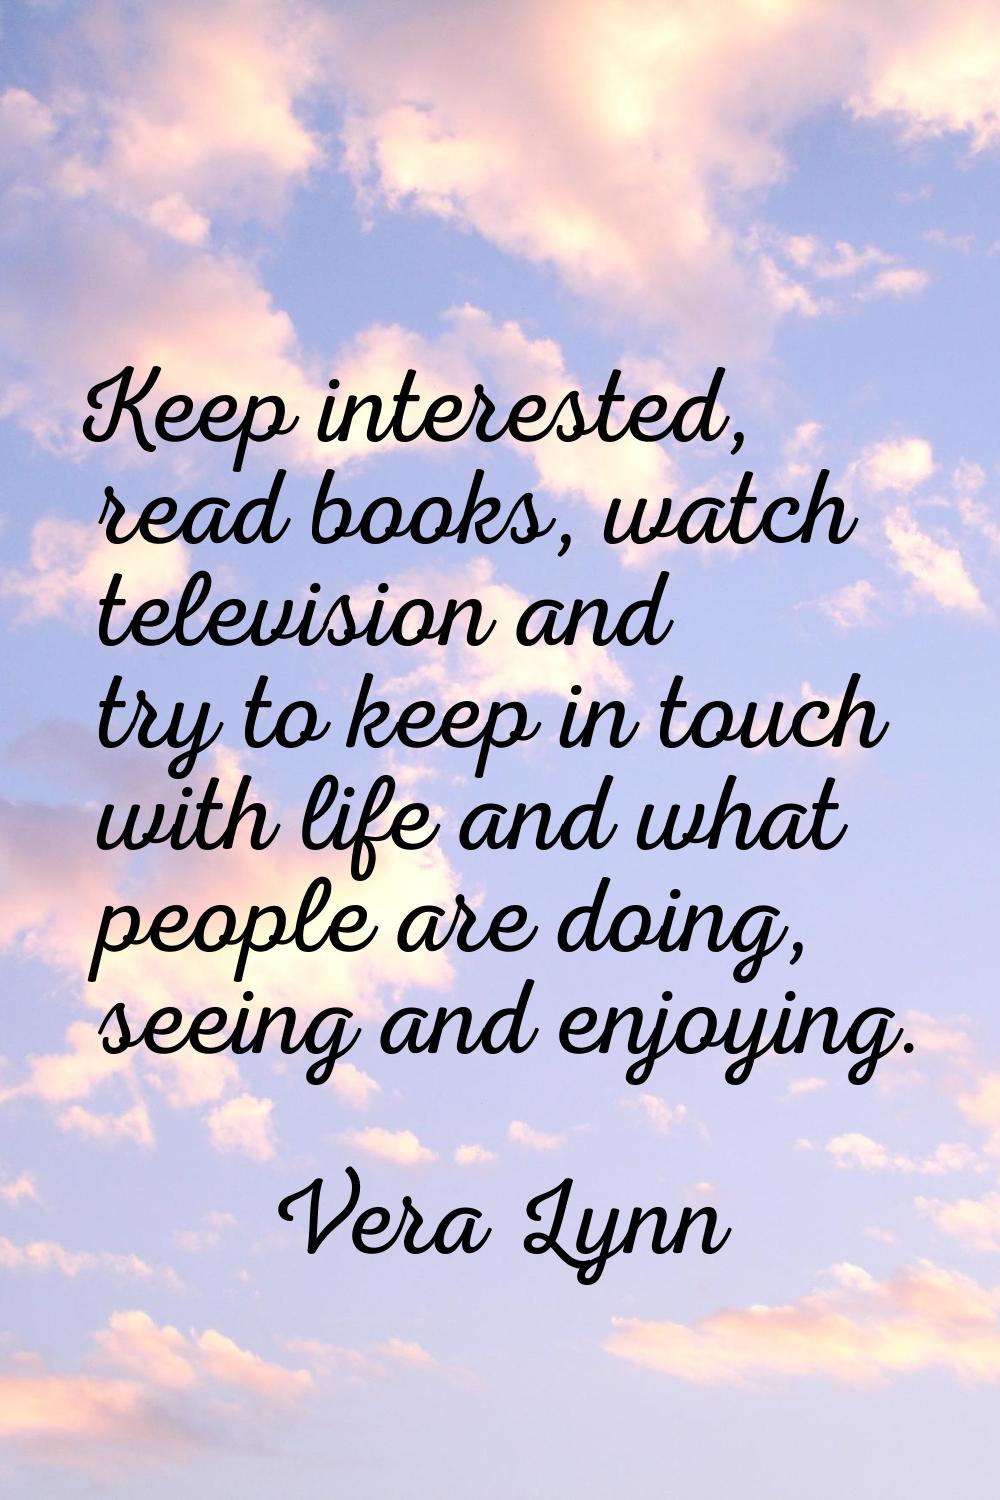 Keep interested, read books, watch television and try to keep in touch with life and what people ar